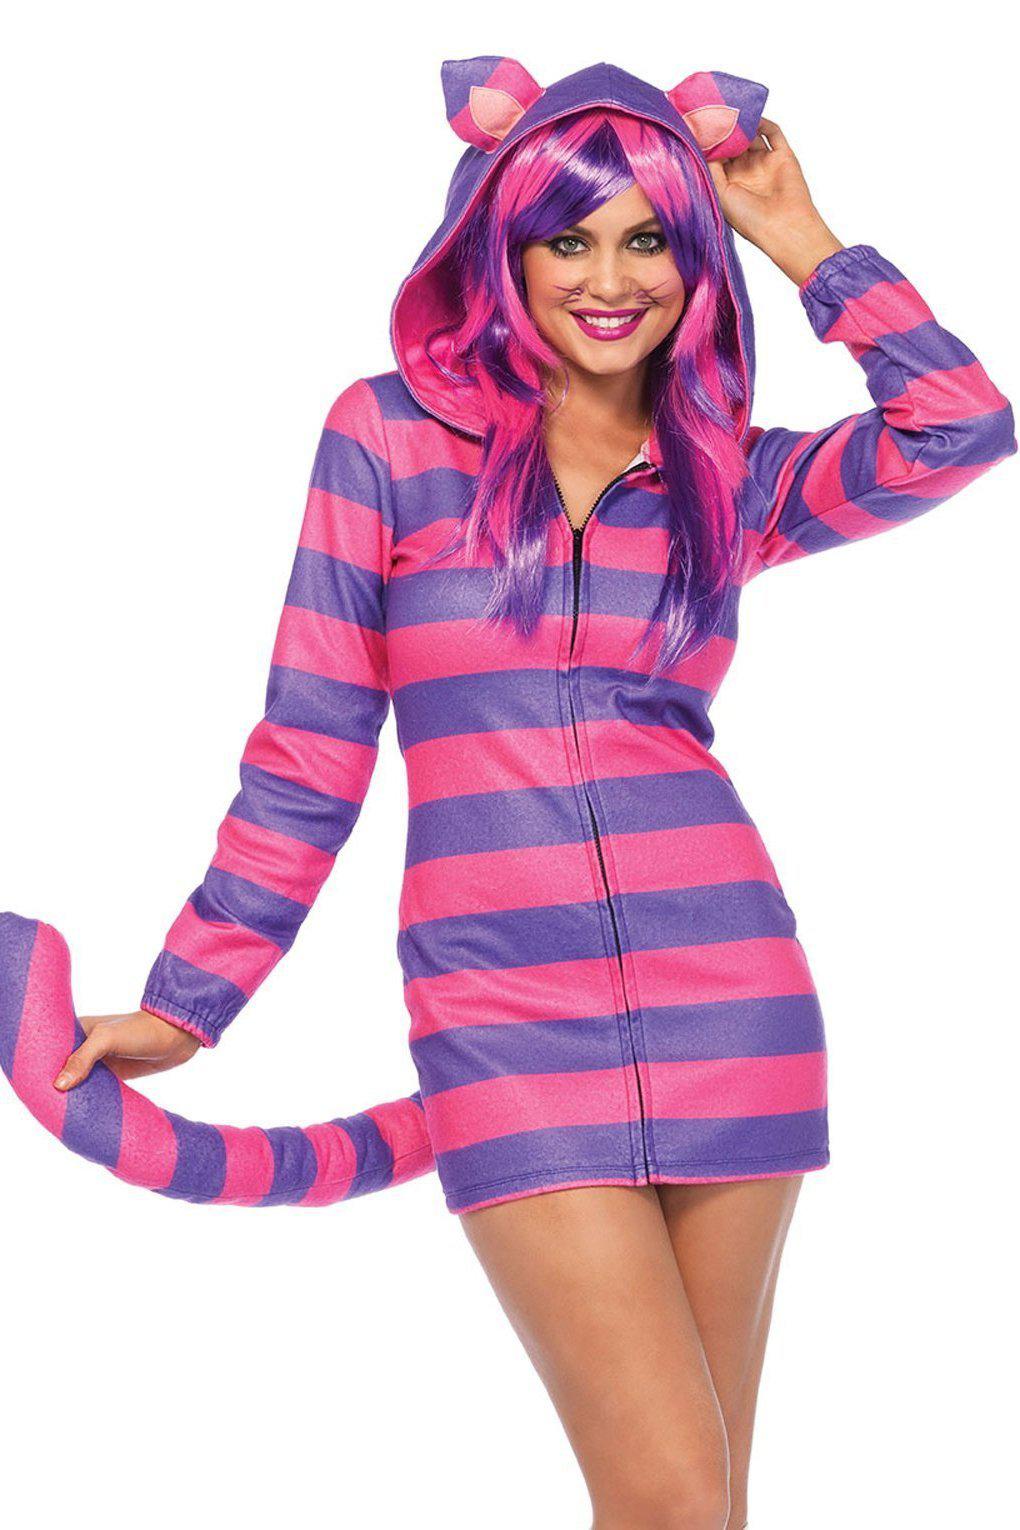 Sexy Cheshire Cat Costume Dress-Fairytale Costumes-Leg Avenue-Pink-S-SEXYSHOES.COM